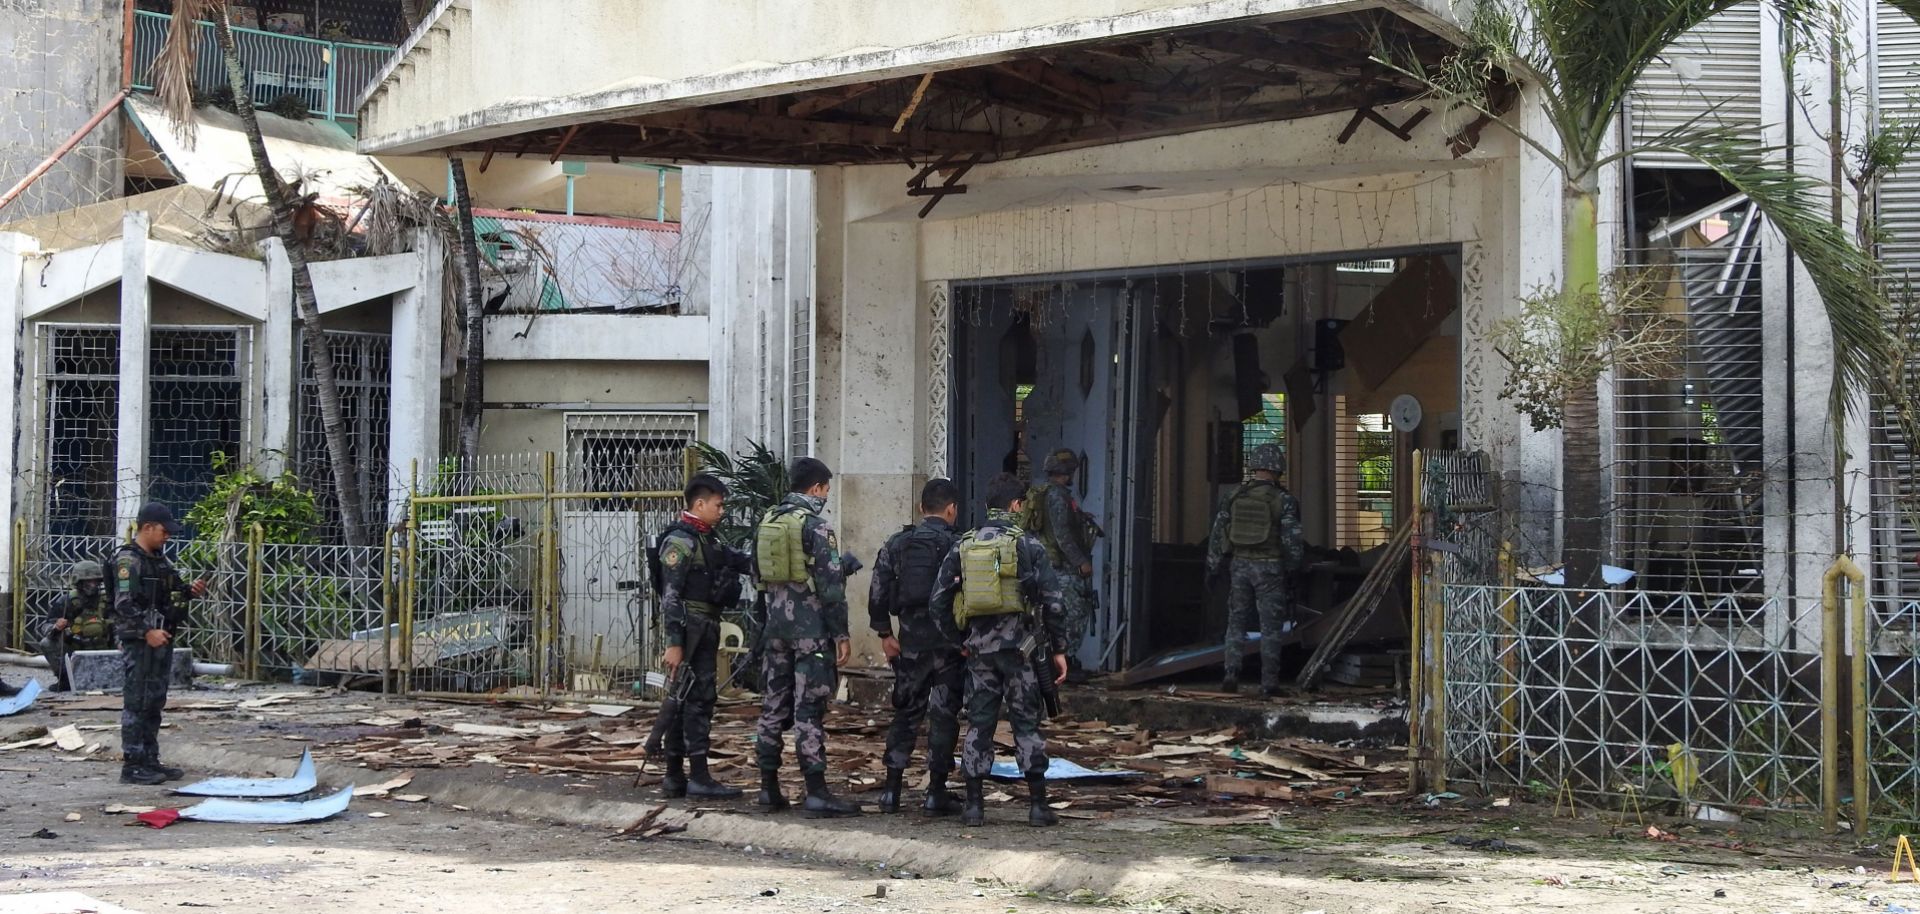 Police officers and soldiers stand outside a Catholic church in Jolo, Philippines, on Jan. 27, 2019, the day after two suicide bombings killed 20 people.